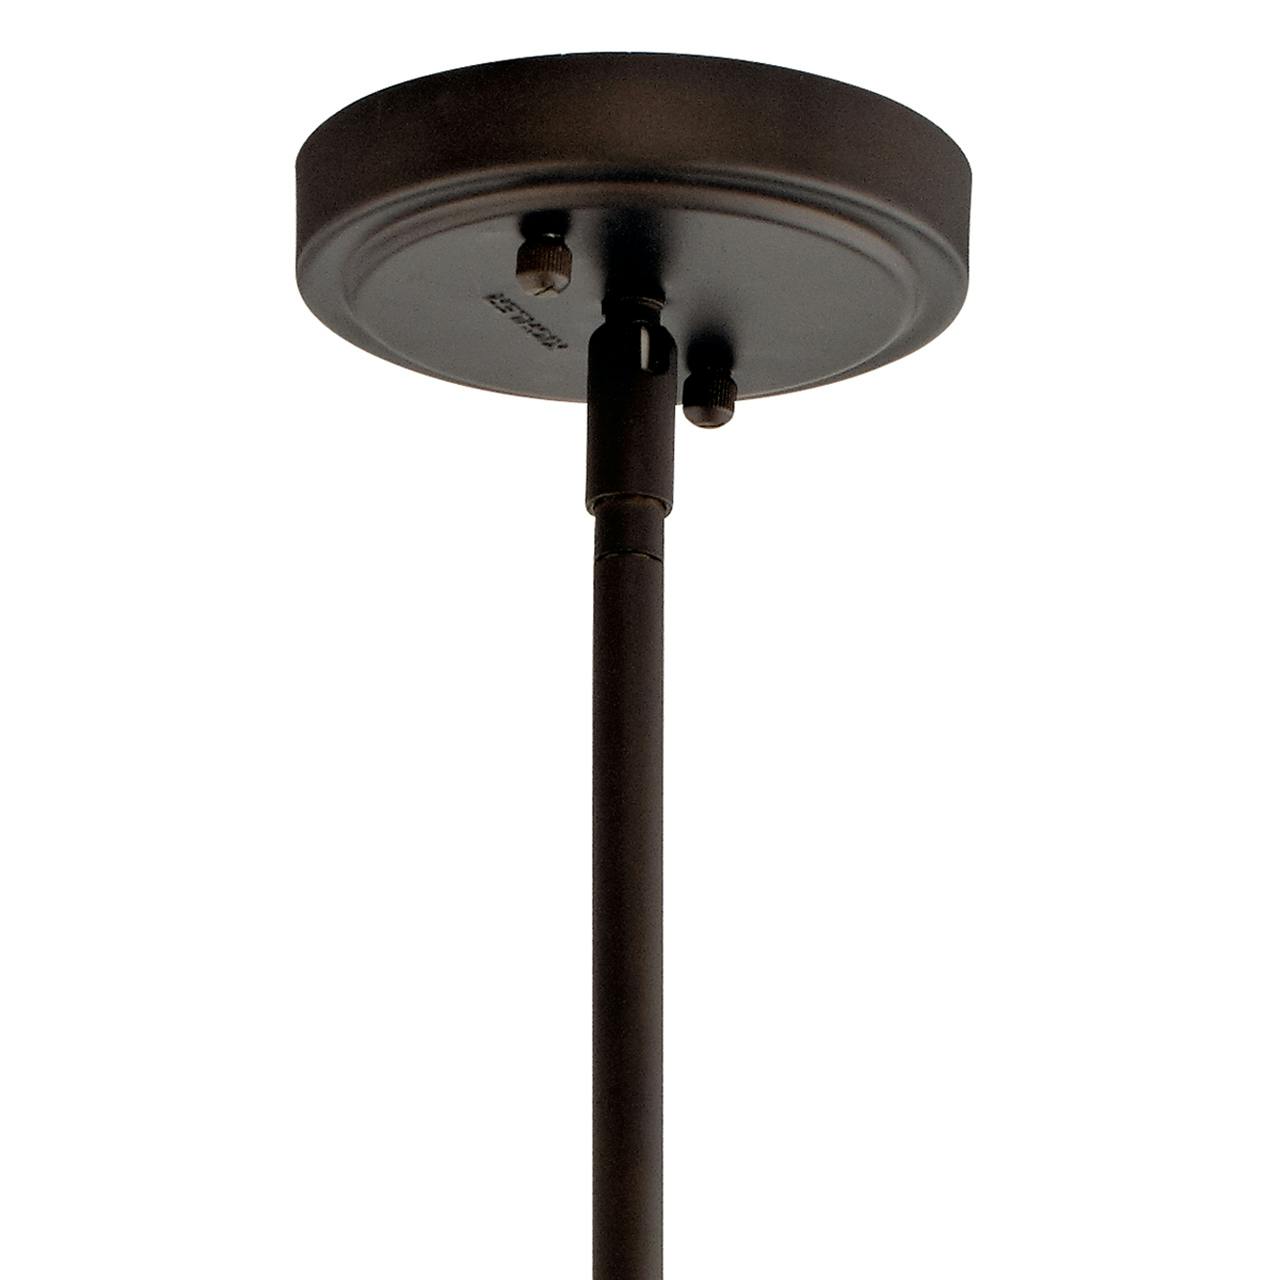 Canopy for the Everly 13.75" Pendant Clear Glass Bronze on a white background